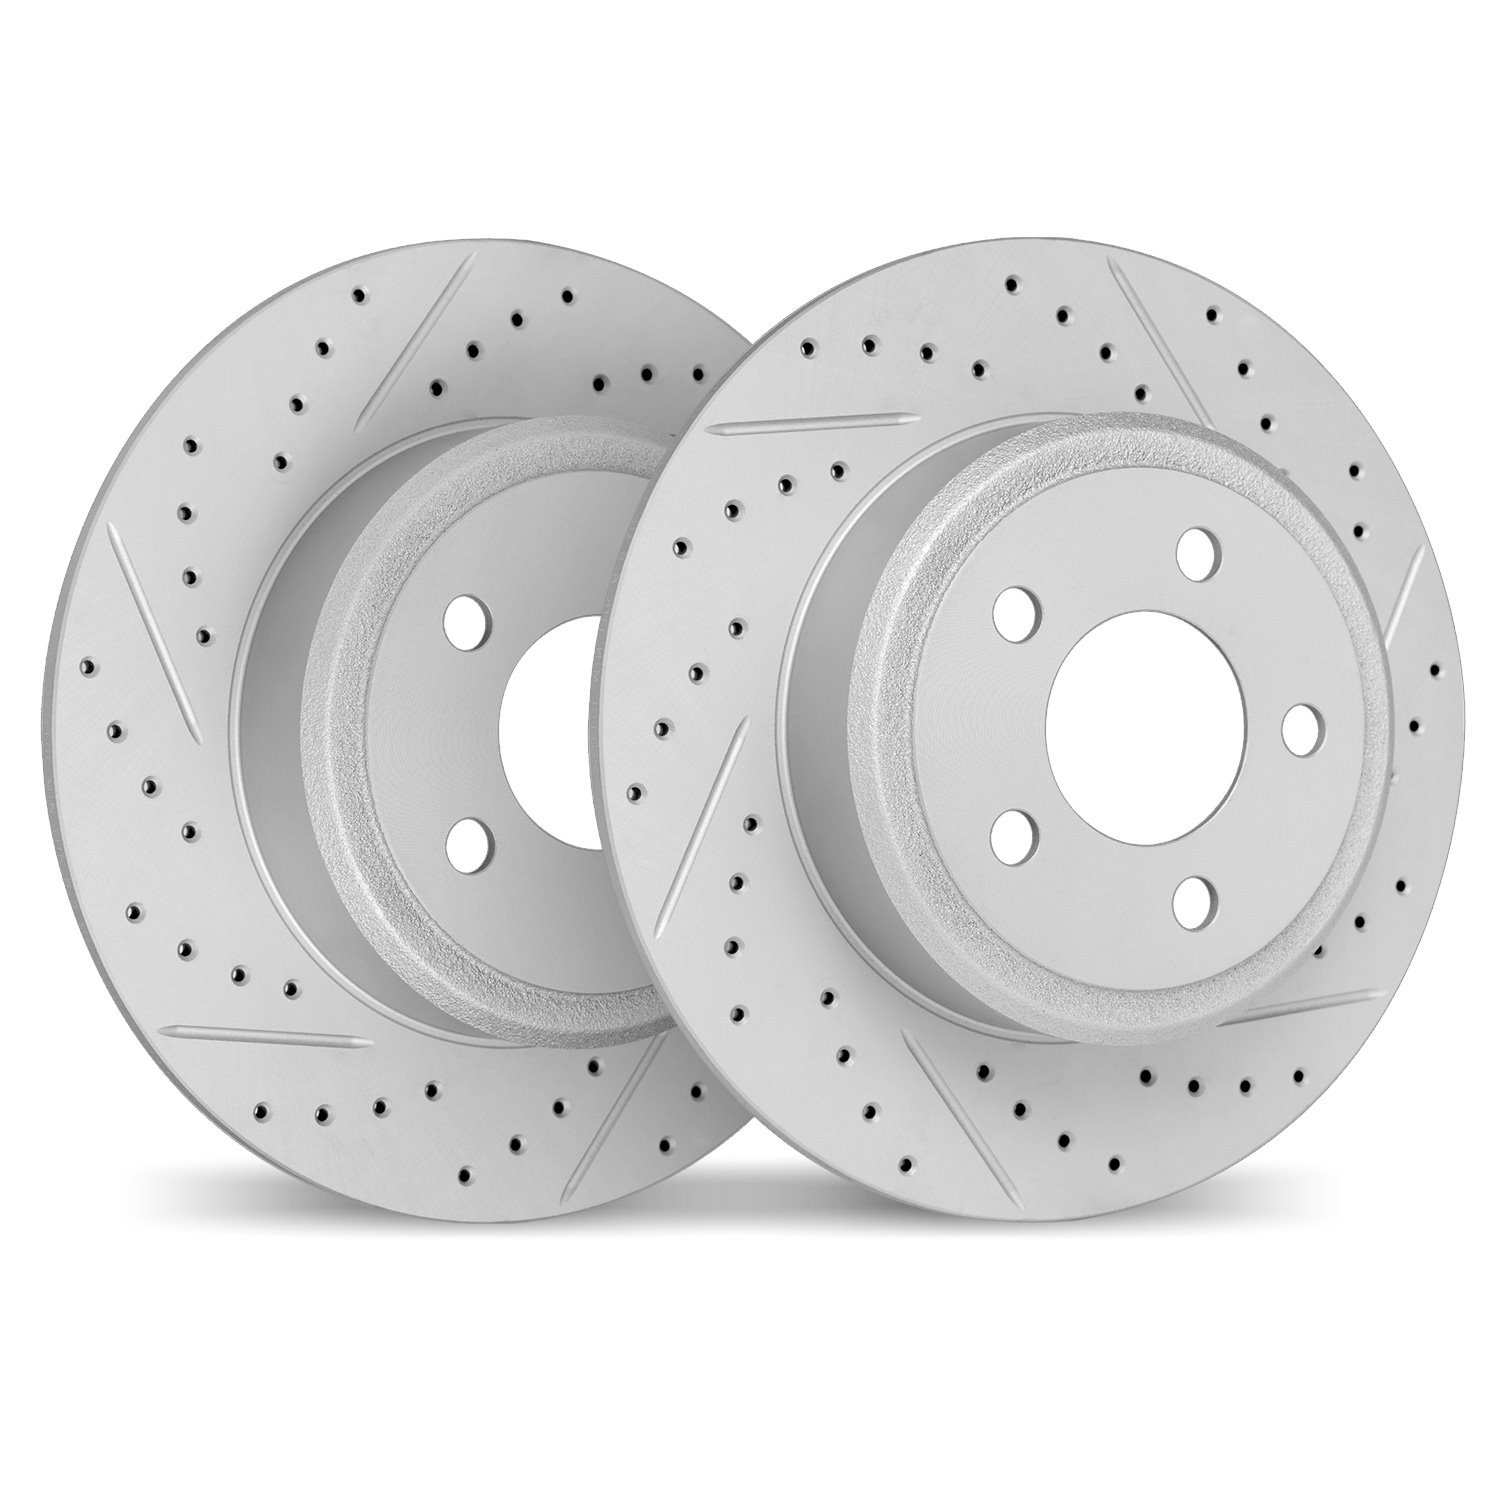 2002-56003 Geoperformance Drilled/Slotted Brake Rotors, 1996-2002 Ford/Lincoln/Mercury/Mazda, Position: Rear